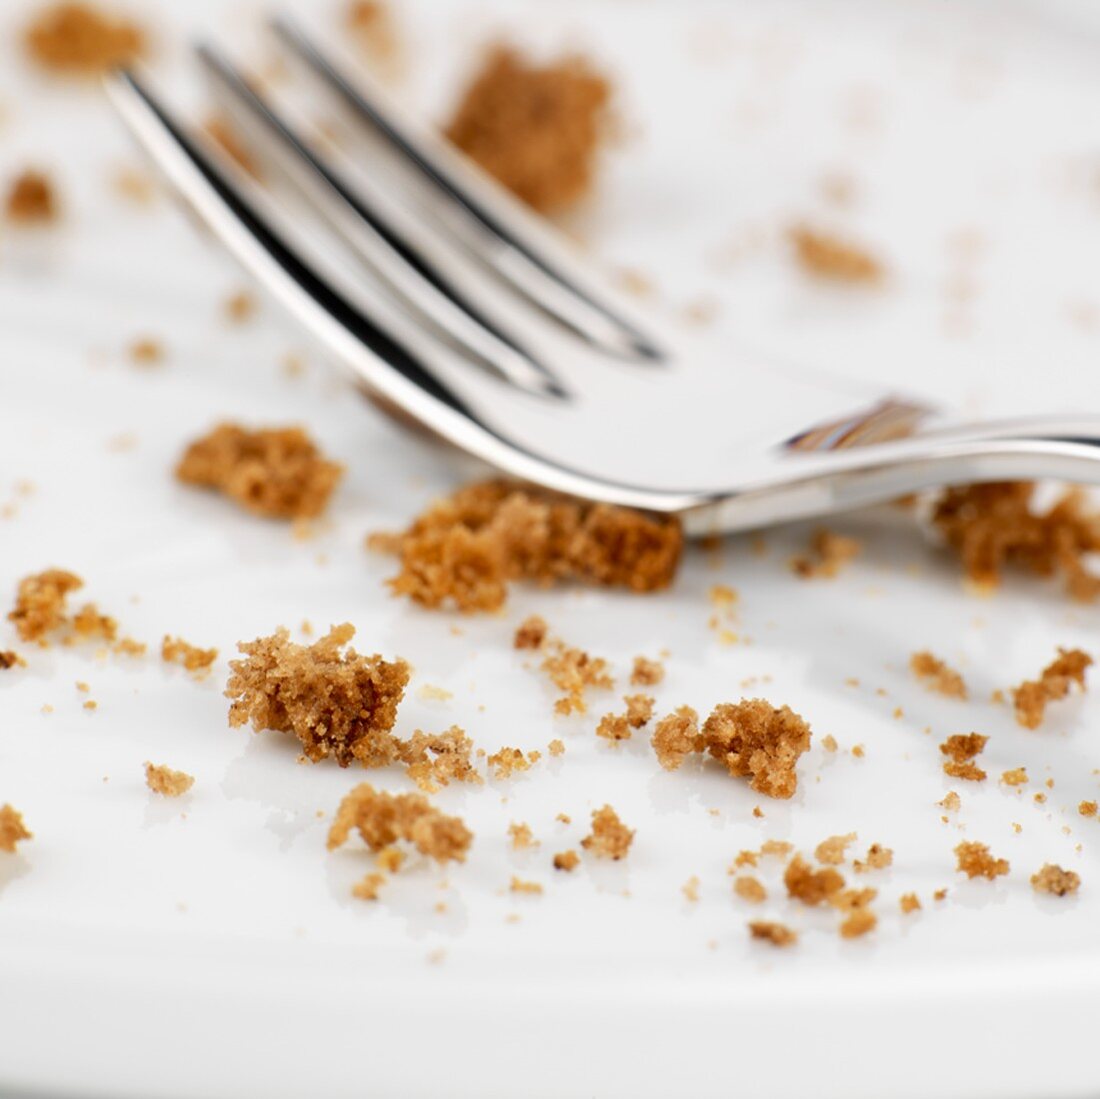 A cake fork surrounded by cake crumbs